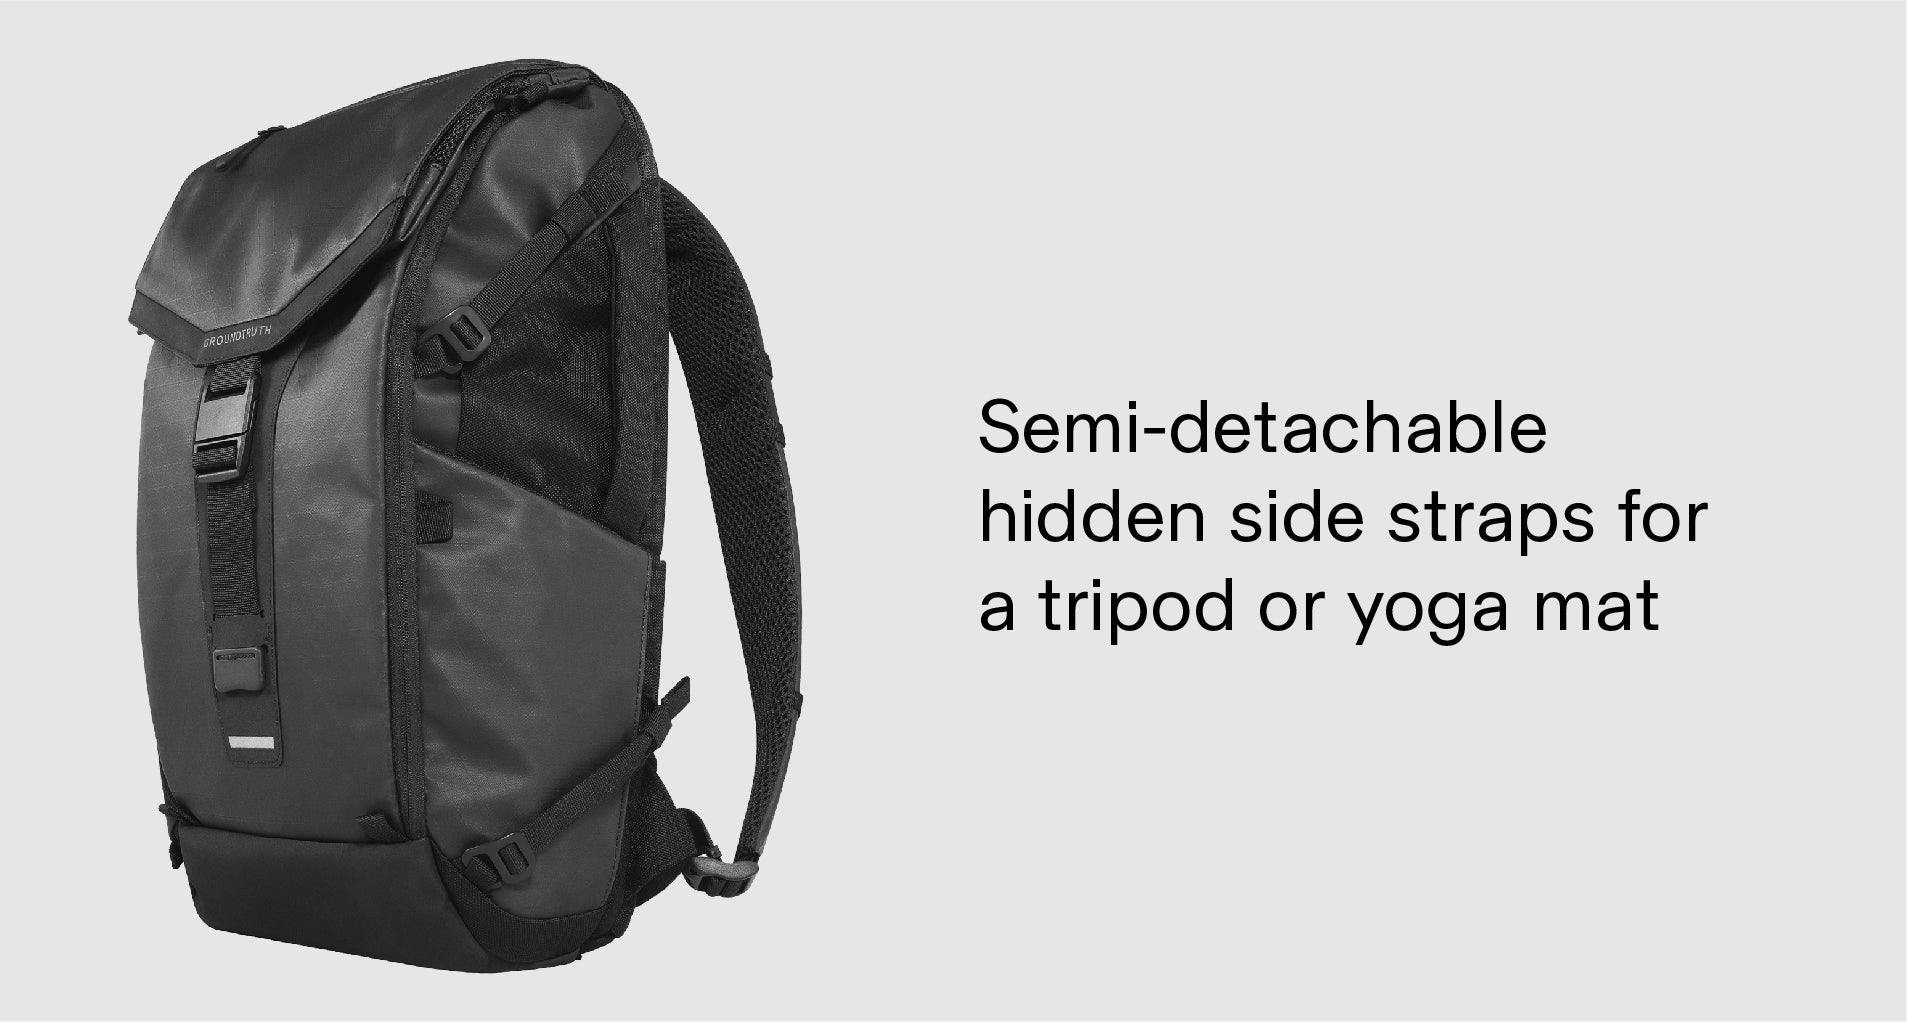 Groundtruth Backpack semi de attached side straps for Yoga mat